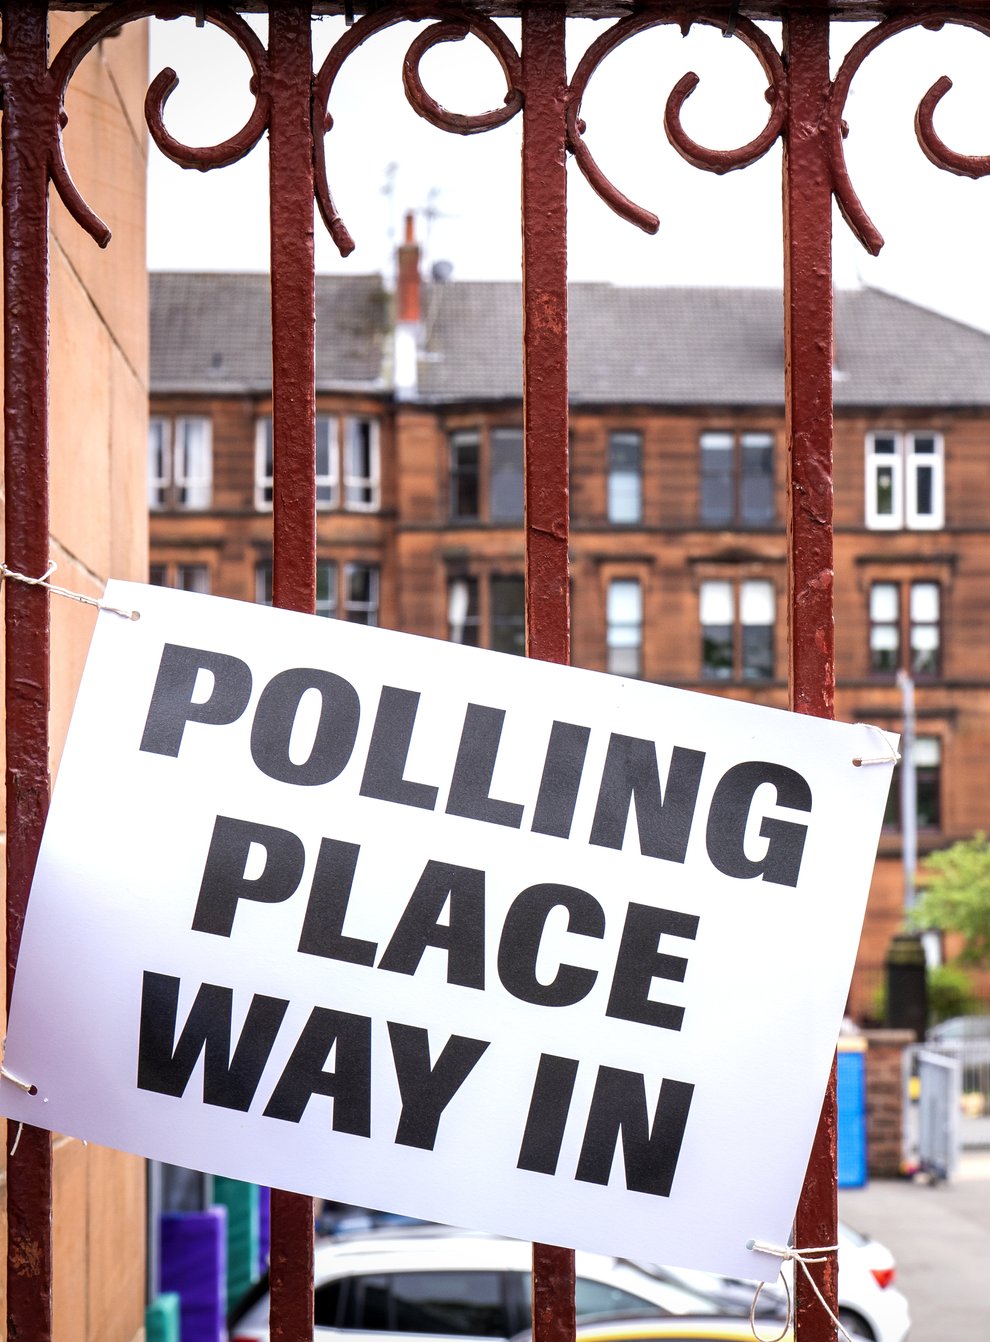 Scots headed to polling stations to vote in the council elections on Thursday (Jane Barlow/PA)